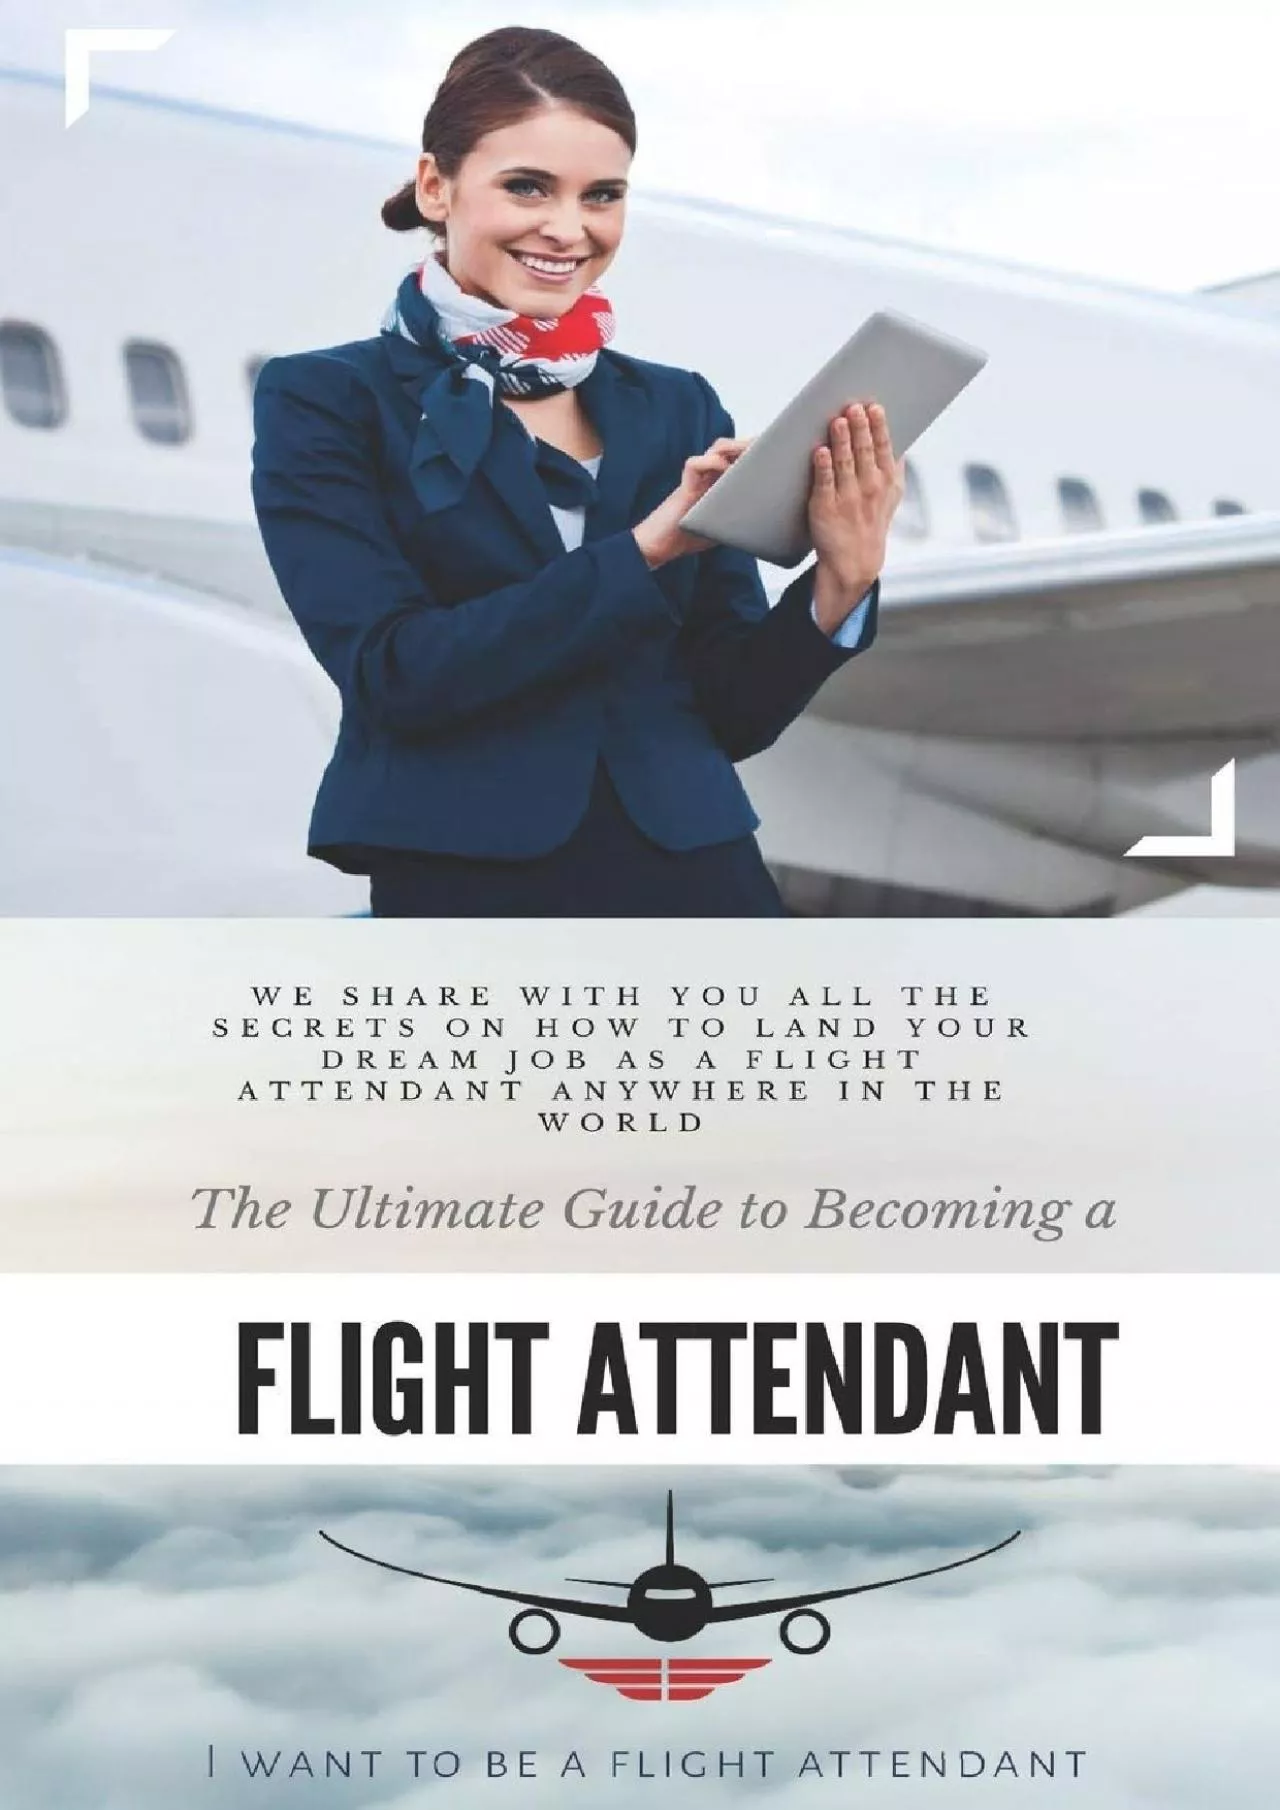 [DOWNLOAD] The Ultimate Guide To Becoming A Flight Attendant: This guide shares with you